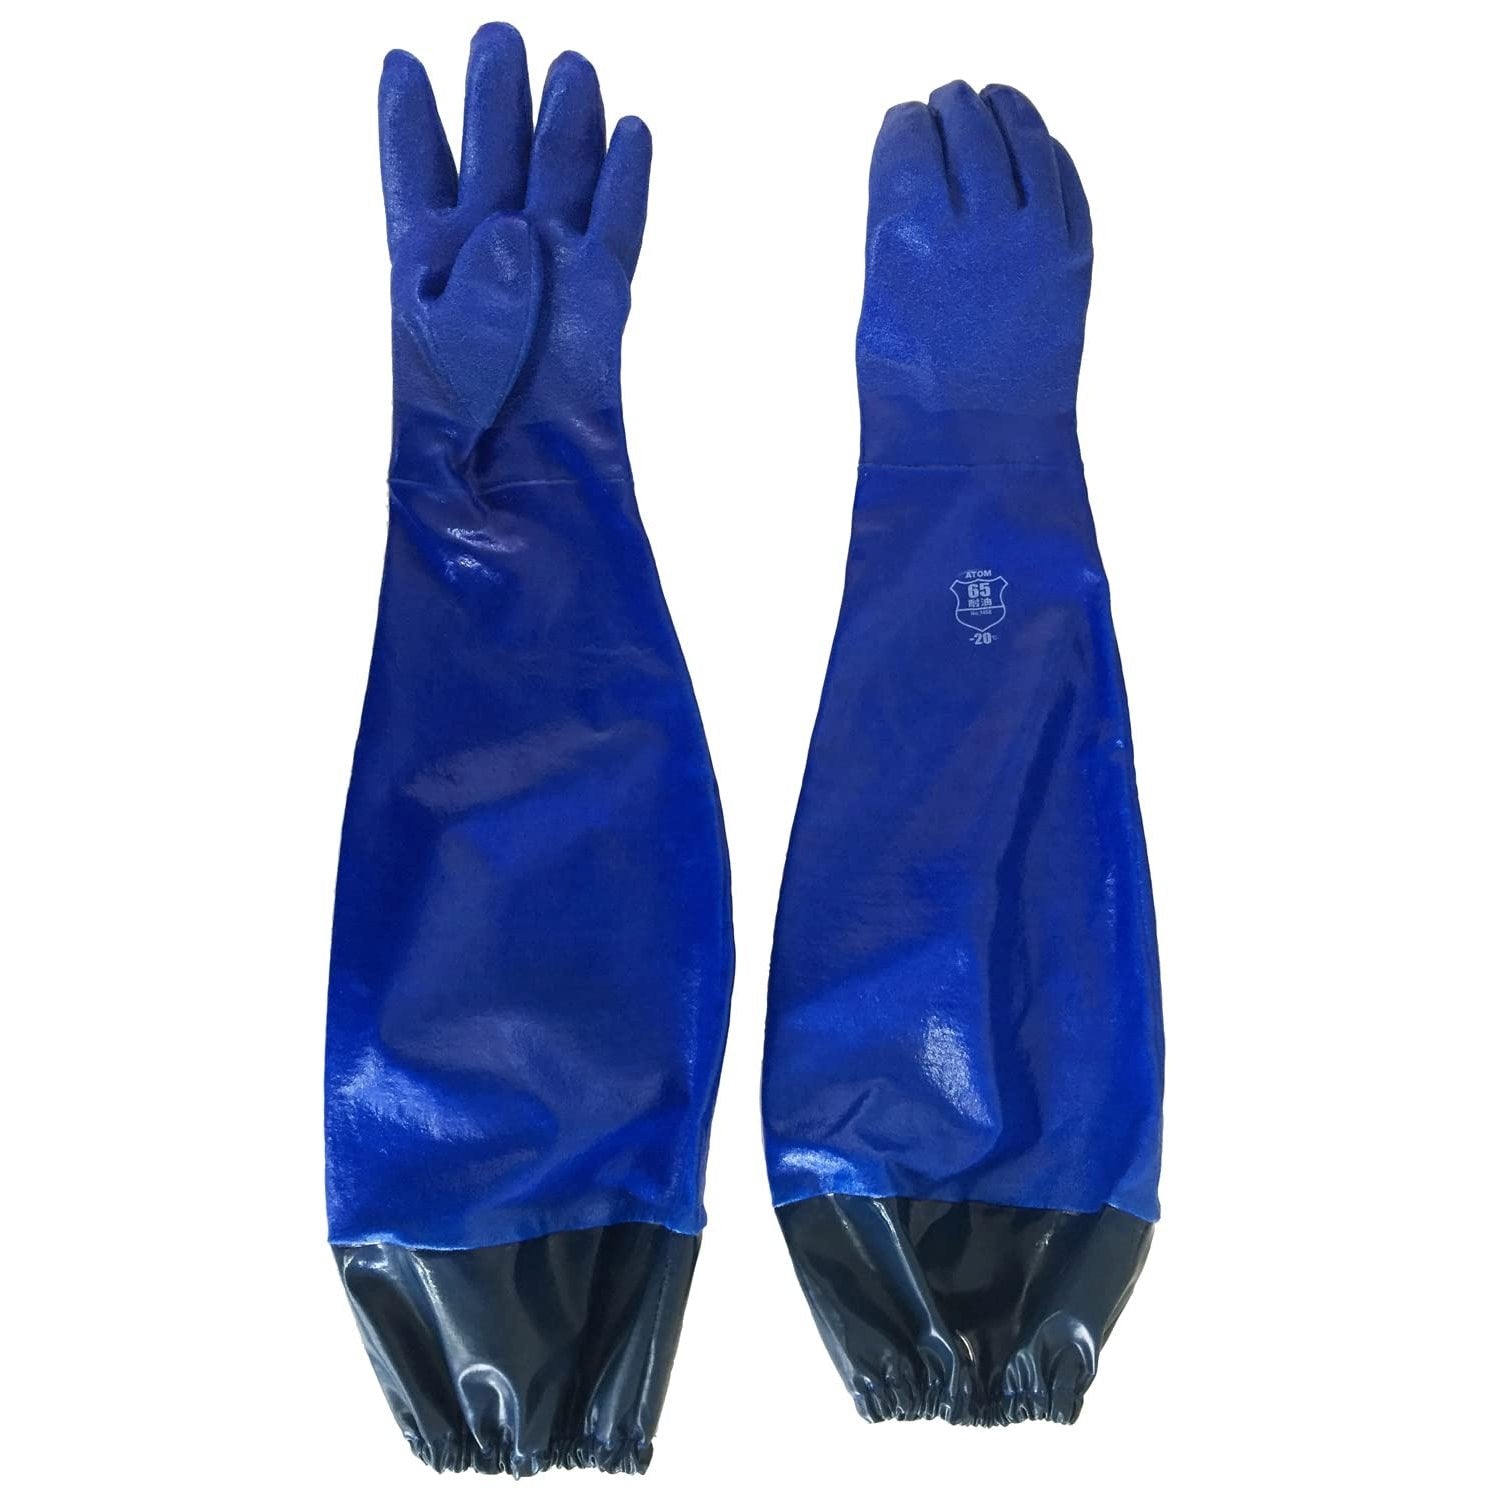 Atom Extra Durable Non-Slip Work Gloves 157 by Daitool